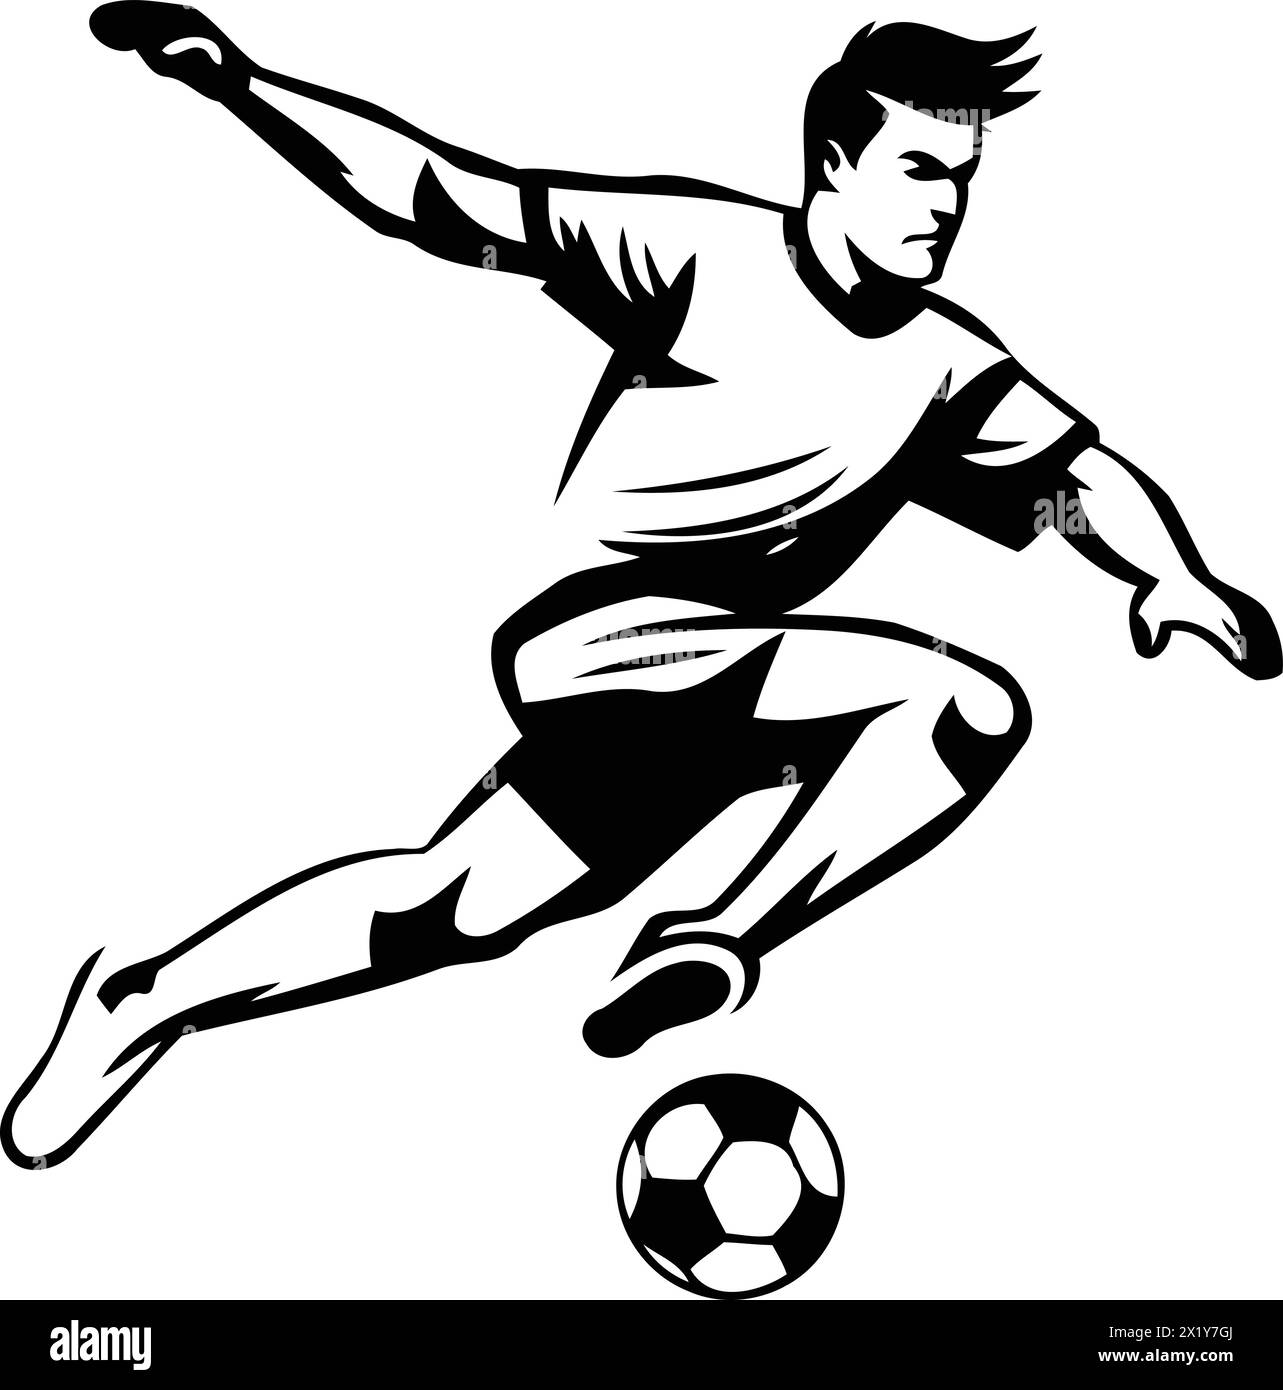 Soccer player kicking the ball. Vector illustration on isolated background. Stock Vector